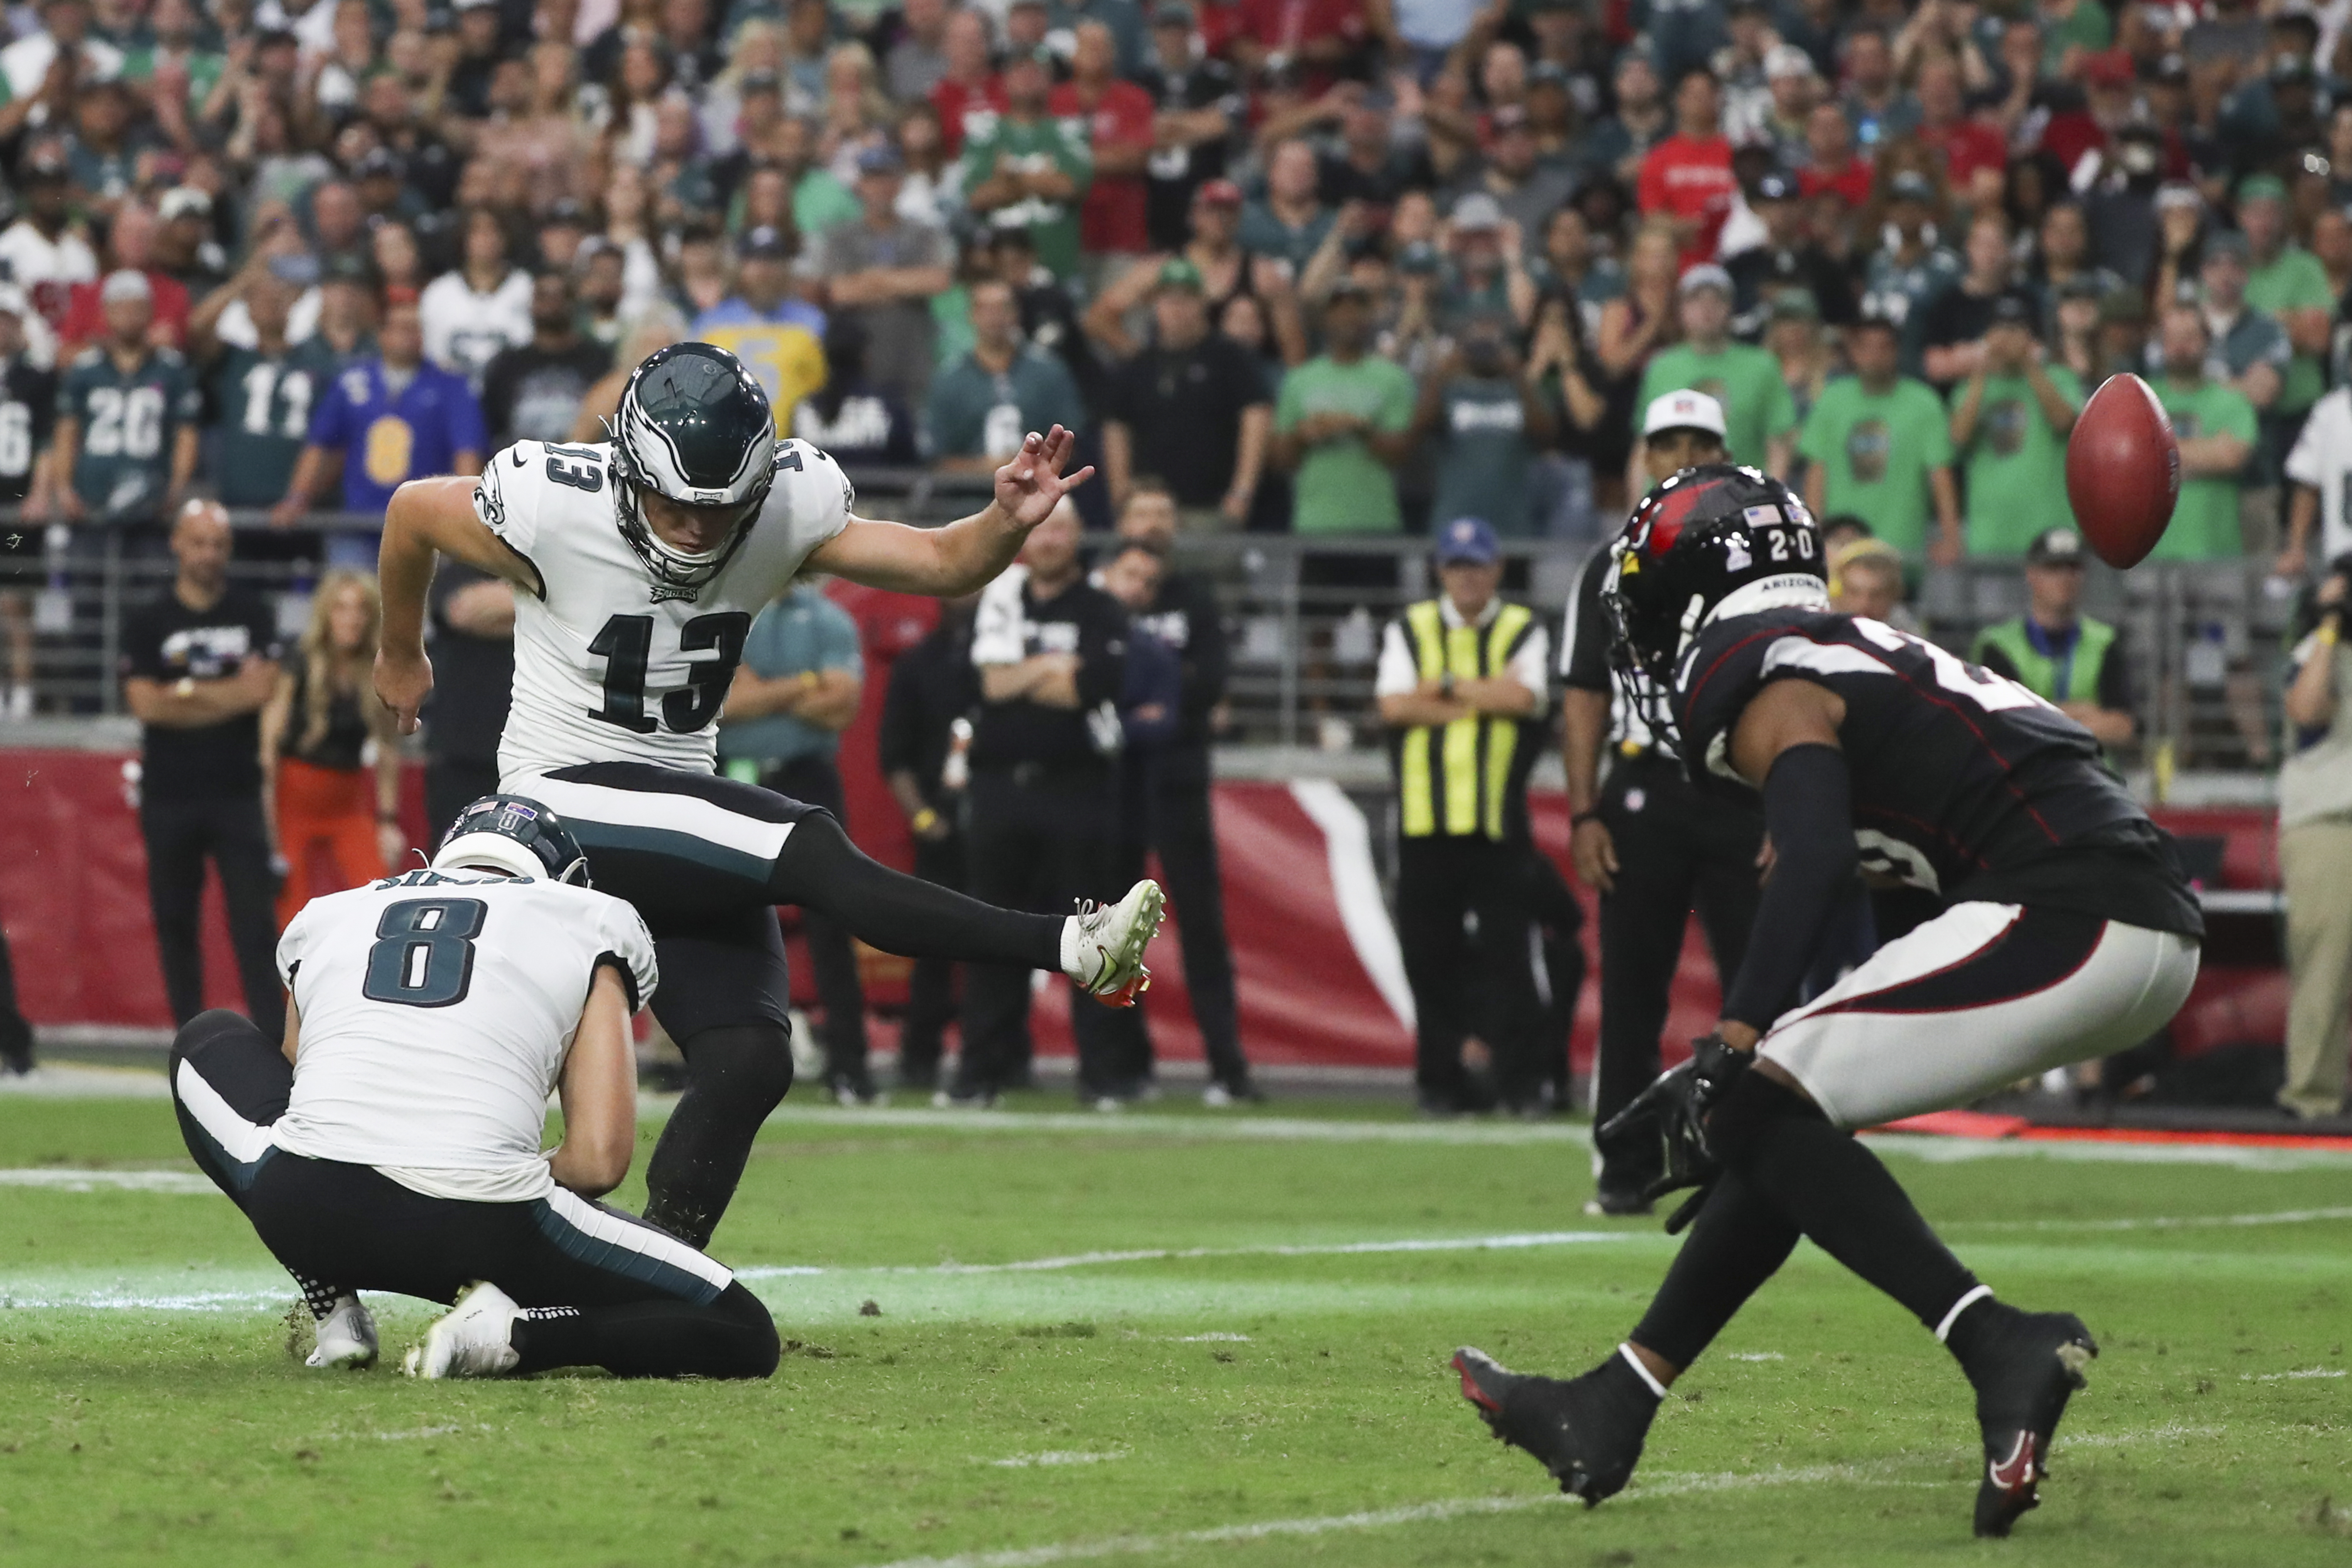 5 - 0! Eagles stay undefeated, hang on to beat Cardinals 20-17